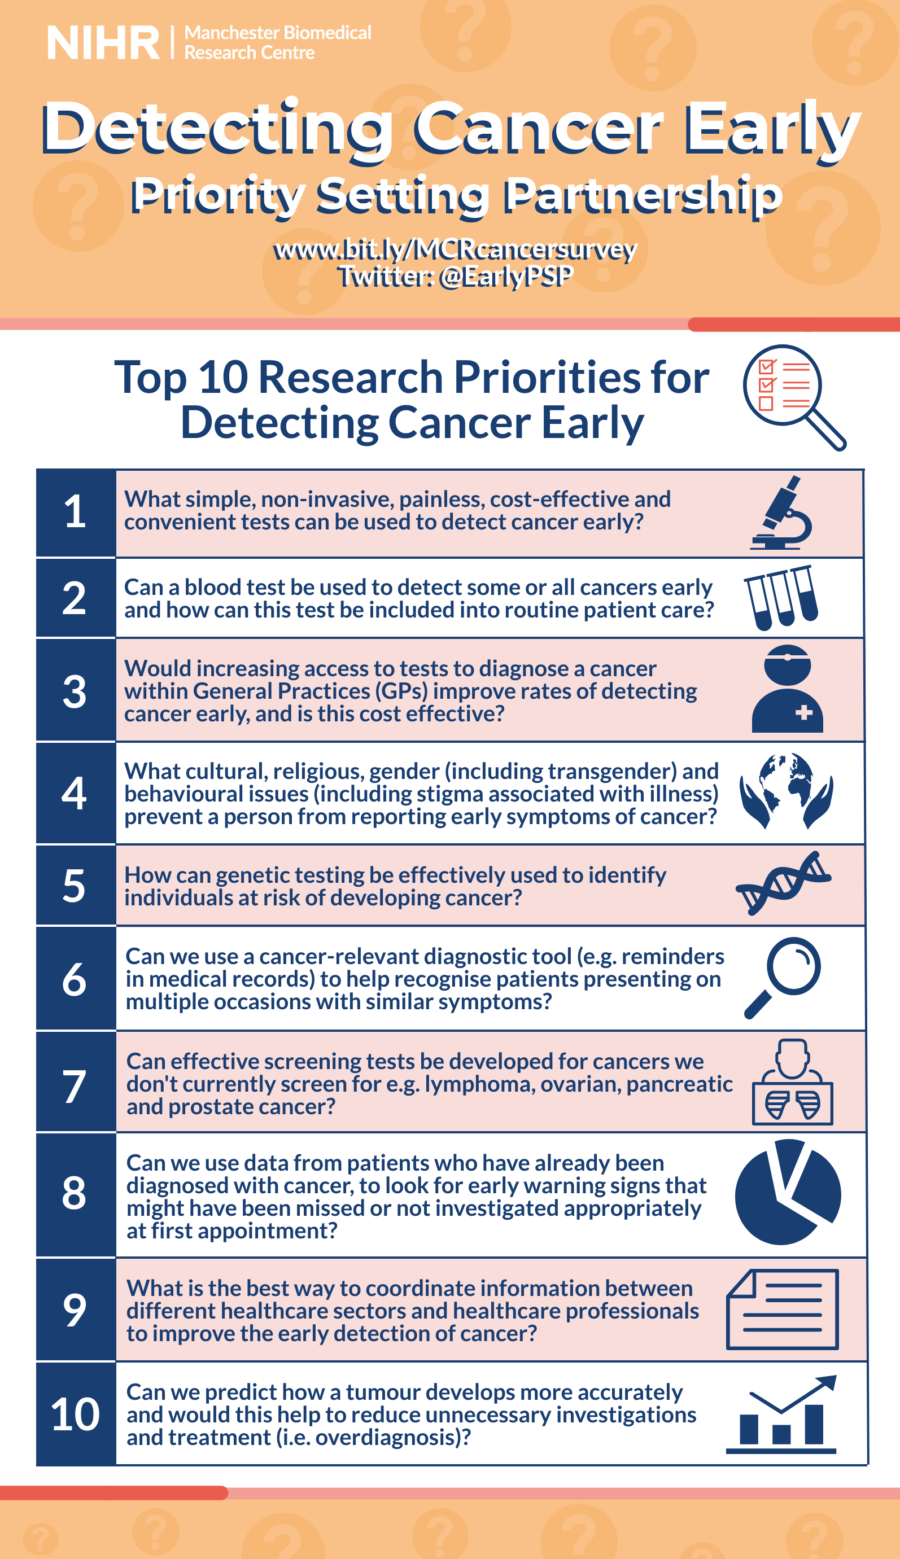 Image listing the Top 10 Research Priorities for Detecting Cancer Early. Website link: www.bit.ly/cancersurveymcr, Twitter: @EarlyPSP. The Top 10. 1.	What simple, non-invasive, painless, cost-effective and convenient tests can be used to detect cancer early? 2.	Can a blood test be used to detect some or all cancers early and how can this test be included into routine patient care? 3.	Would increasing access to tests to diagnose a cancer within General Practices (GPs) improve rates of detecting cancer early, and is this cost effective? 4.	What cultural, religious, gender (including transgender) and behavioural issues (including stigma associated with illness) prevent a person from reporting early symptoms of cancer? 5.	How can genetic testing be effectively used to identify individuals at risk of developing cancer? 6.	Can we use a cancer-relevant diagnostic tool (e.g. reminders in medical records) to help recognise patients presenting on multiple occasions with similar symptoms? 7.	Can effective screening tests be developed for cancers we don't currently screen for e.g. lymphoma, ovarian, pancreatic and prostate cancer? 8.	Can we use data from patients who have already been diagnosed with cancer, to look for early warning signs that might have been missed or not investigated appropriately at first appointment? 9.	What is the best way to coordinate information between different healthcare sectors and healthcare professionals to improve the early detection of cancer 10.	Can we predict how a tumour develops more accurately and would this help to reduce unnecessary investigations and treatment (i.e. overdiagnosis)?